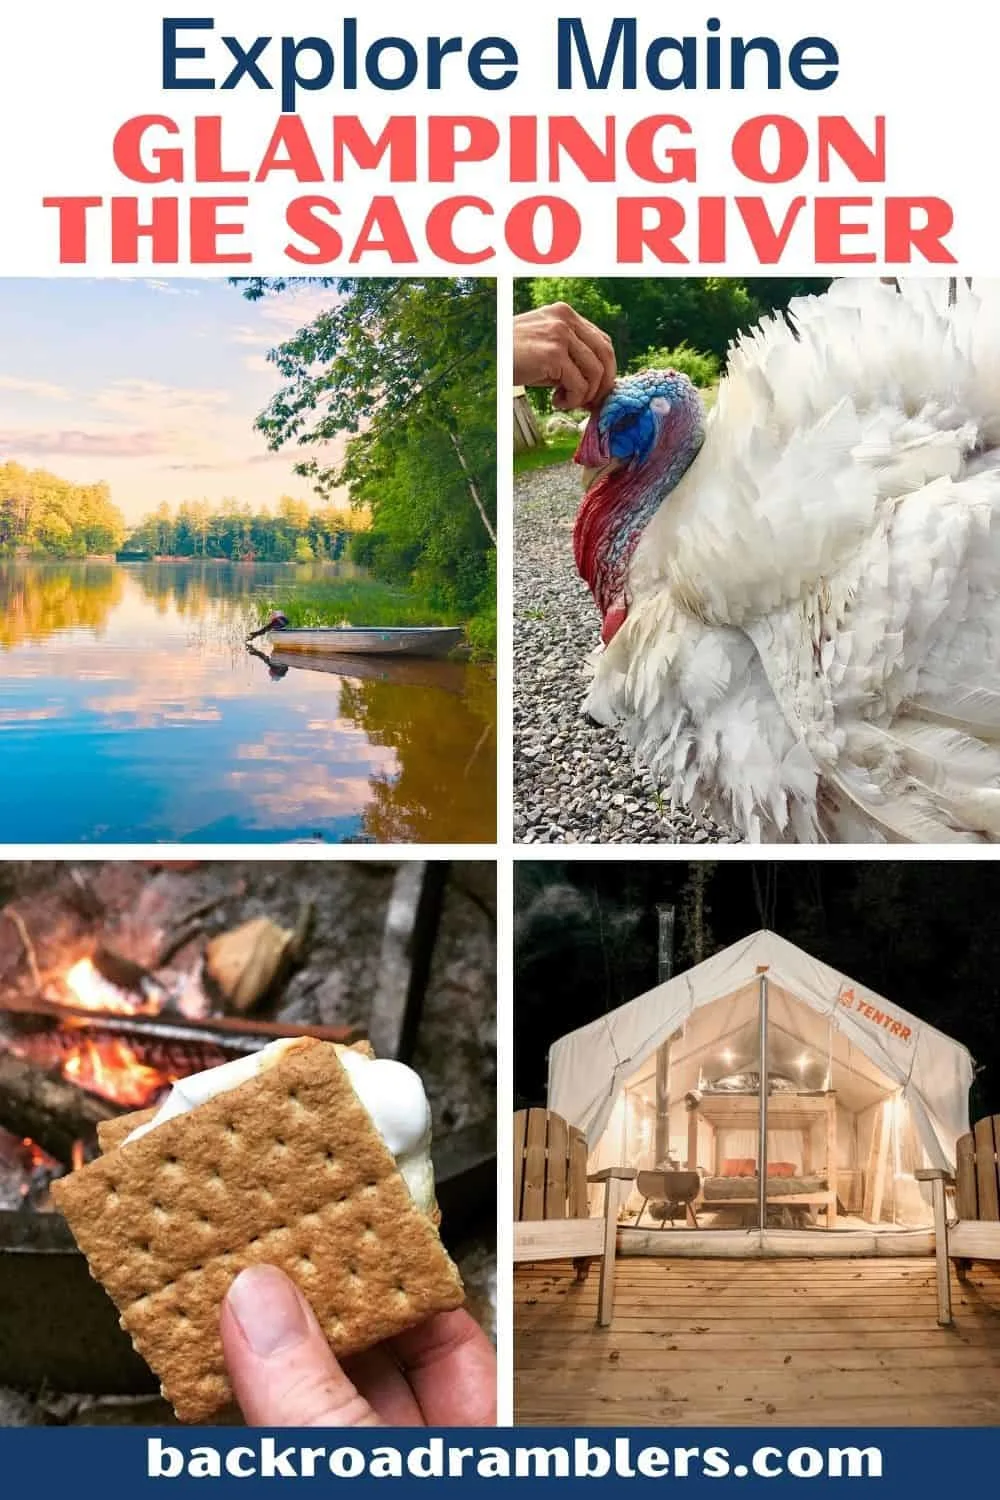 A collage of photos featuring a glamping spot on the Saco River in Maine. Text Overlay: Explore Maine! Glamping on the Saco River